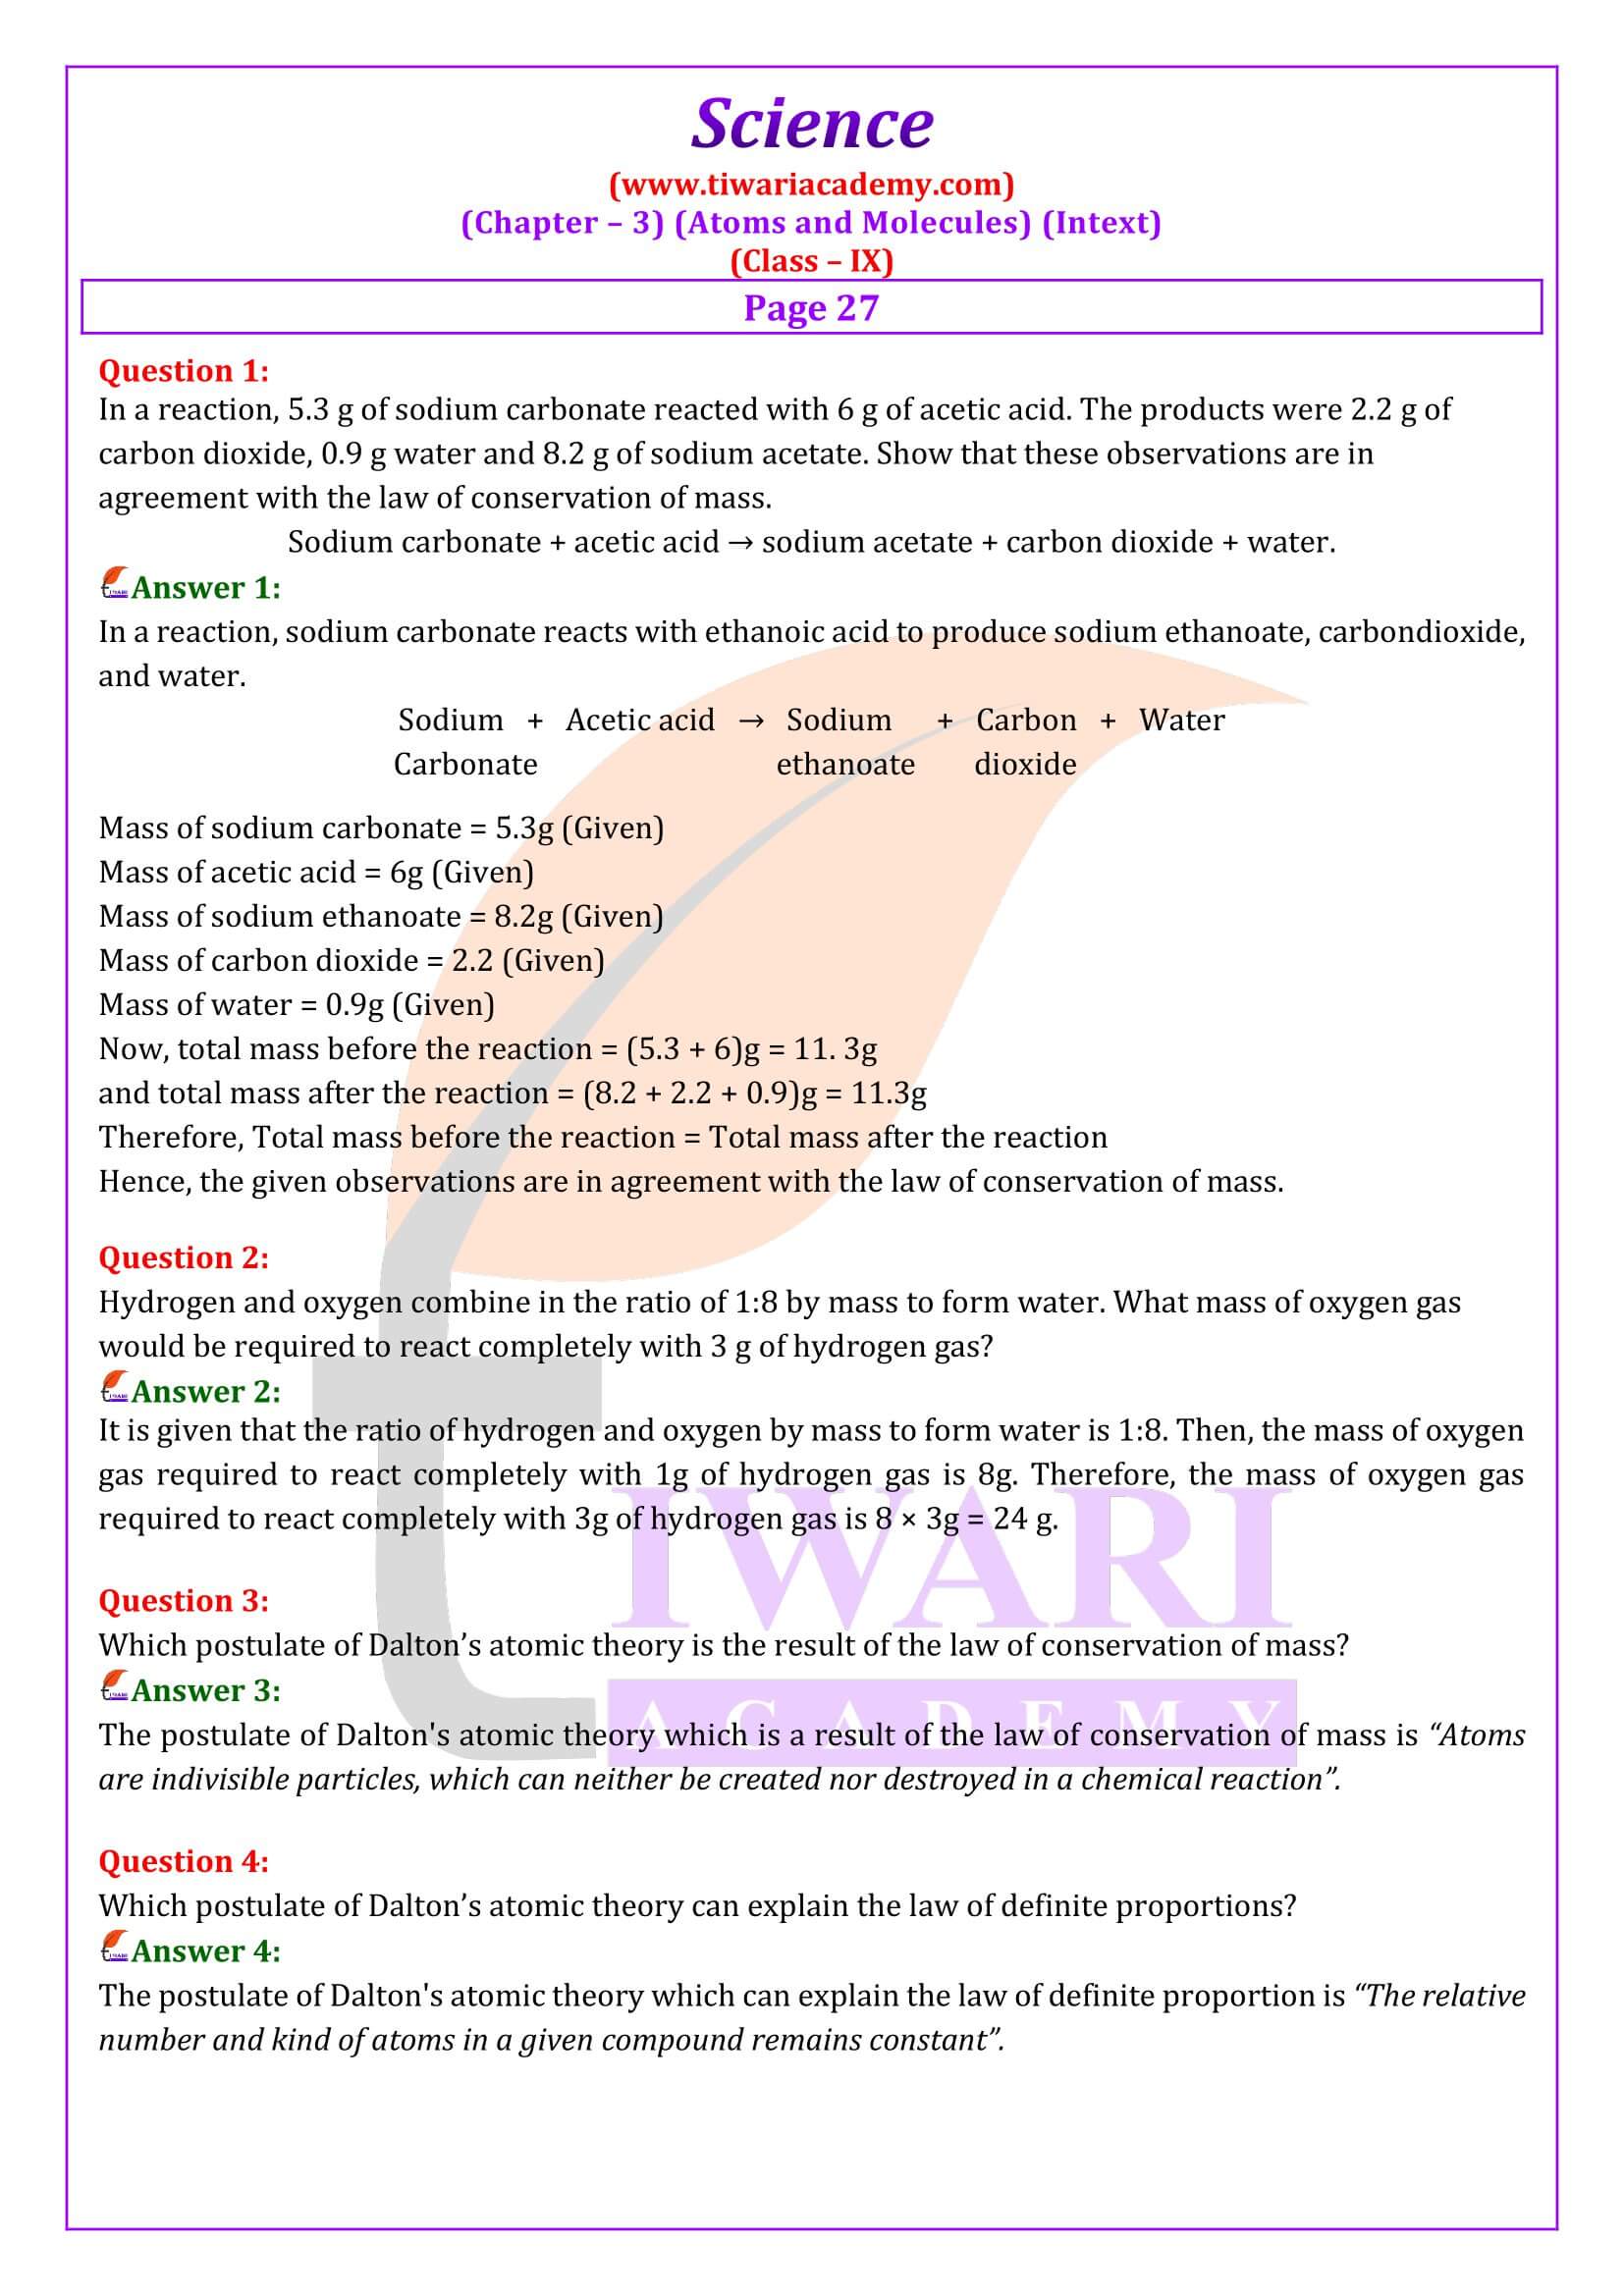 NCERT Solutions for Class 9 Science Chapter 3 Intext Questions